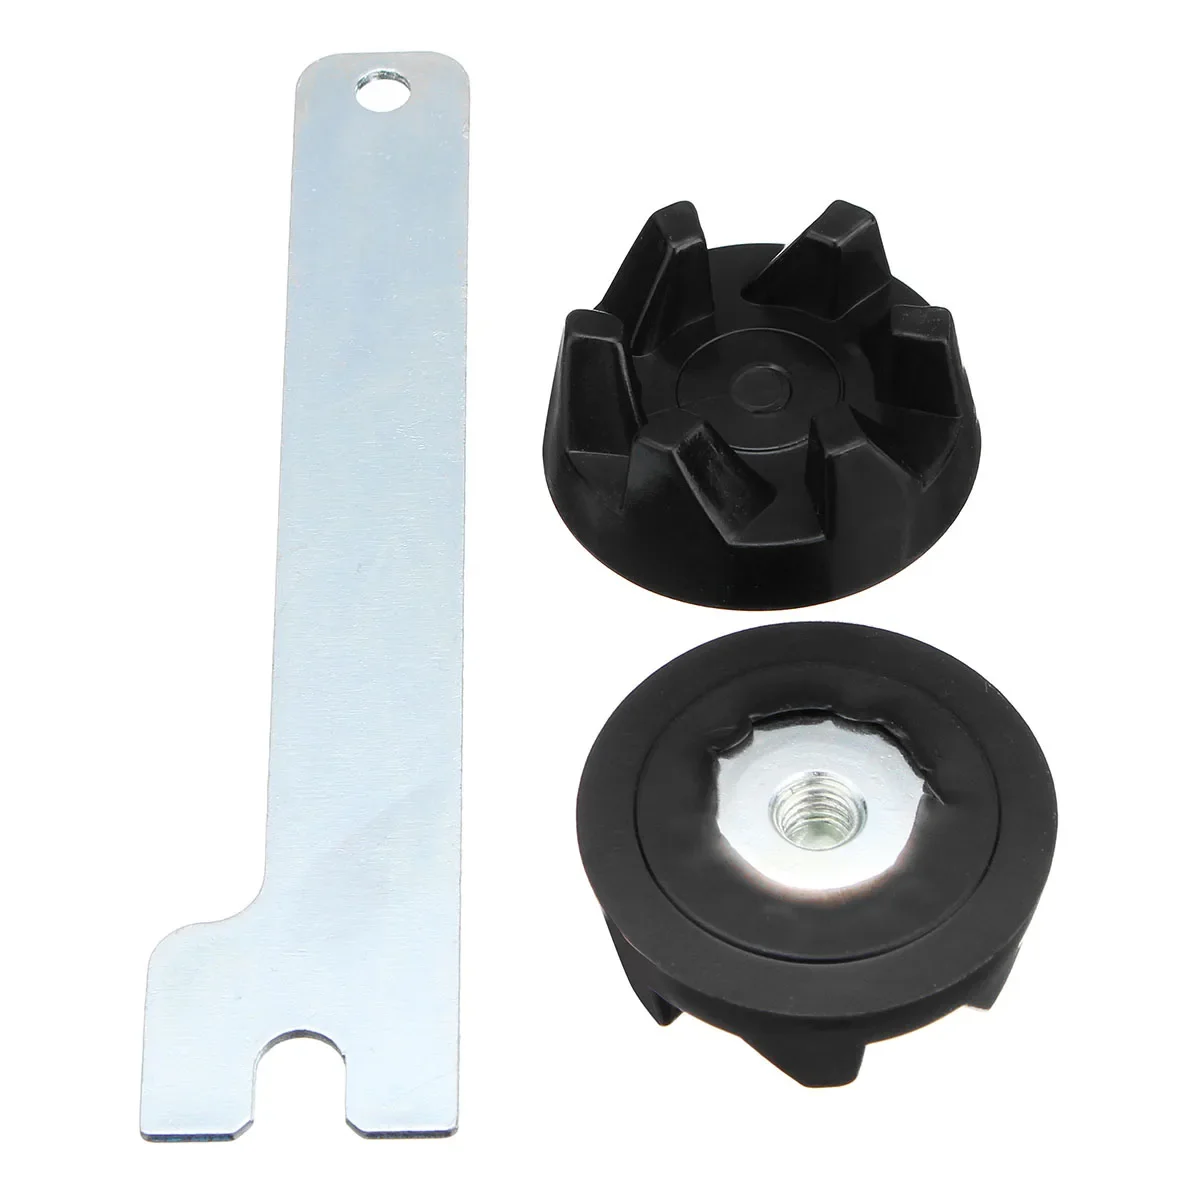 

3PCS/Set Rubber Coupler Gear Clutch With Removal Tool Replacement Kit for Blender KitchenAid 9704230